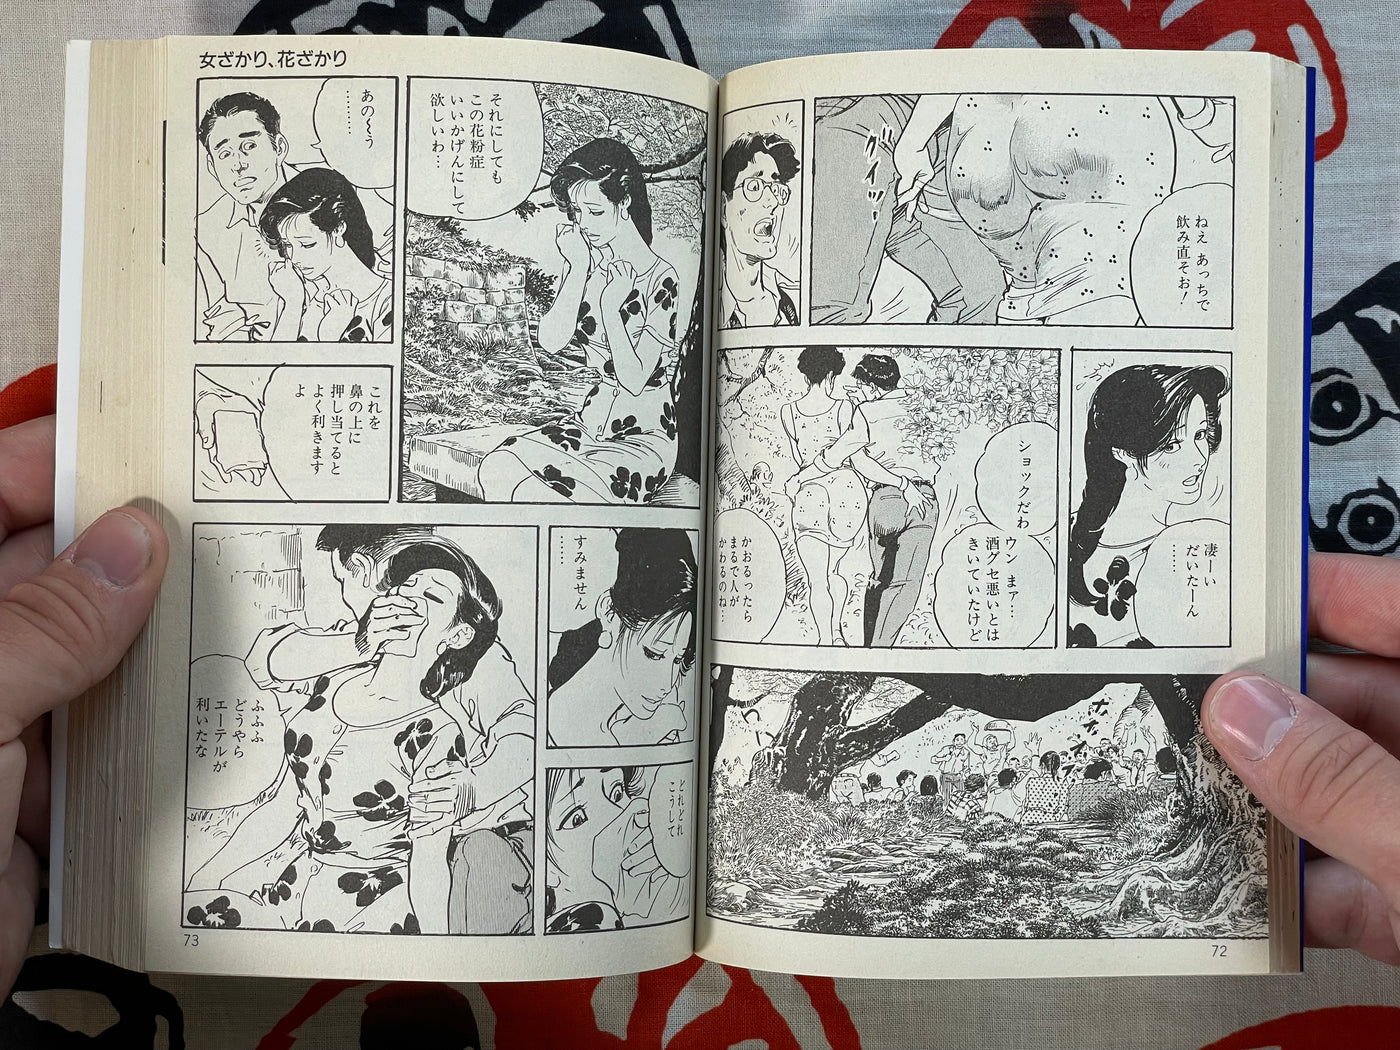 The Wife is Ripe by Ken Tsukikage (1996)